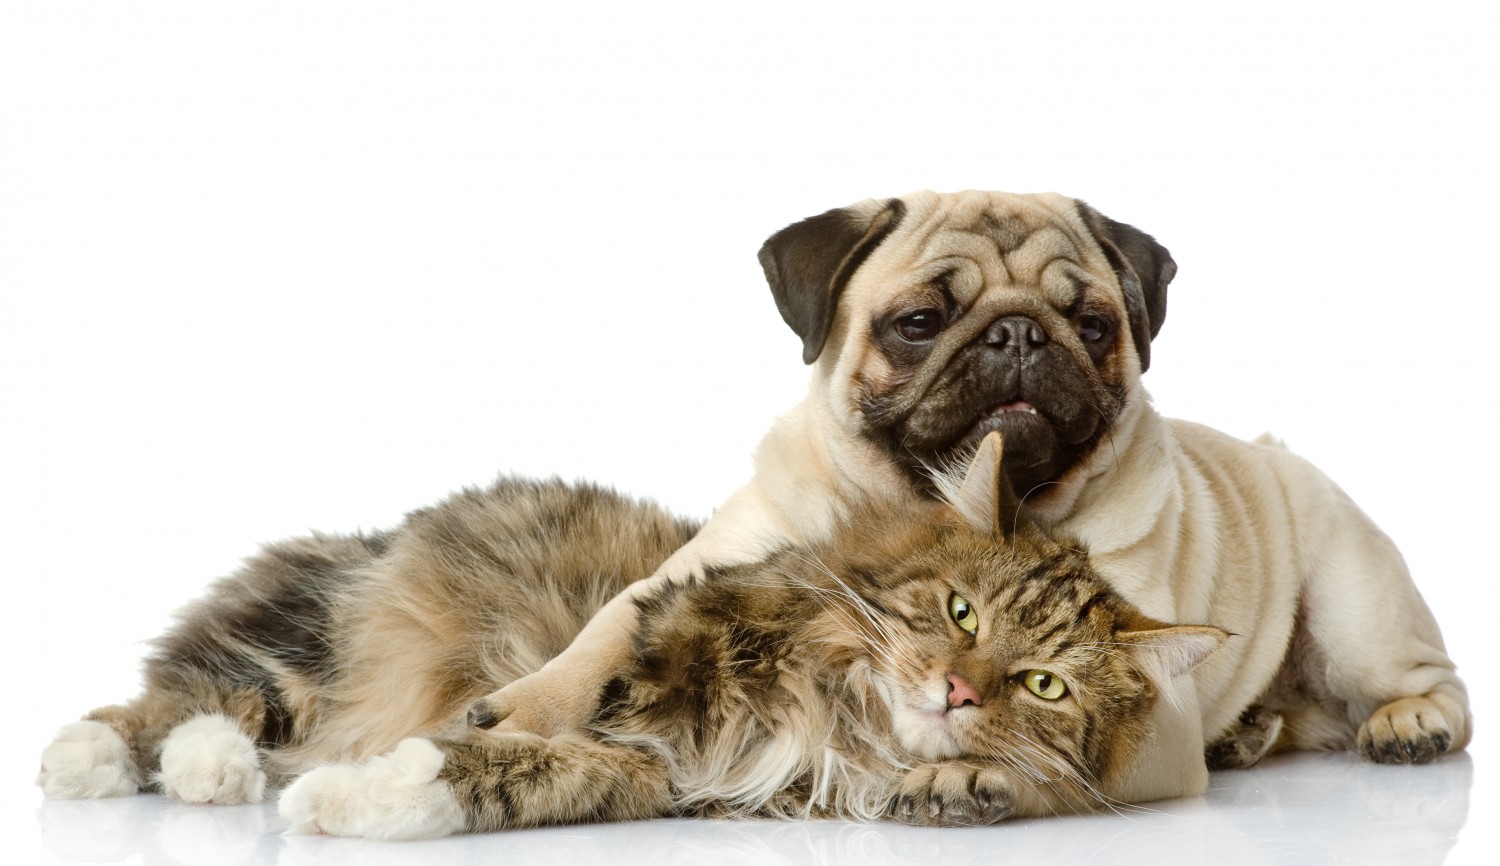 Cat and Pug Dog Snuggling